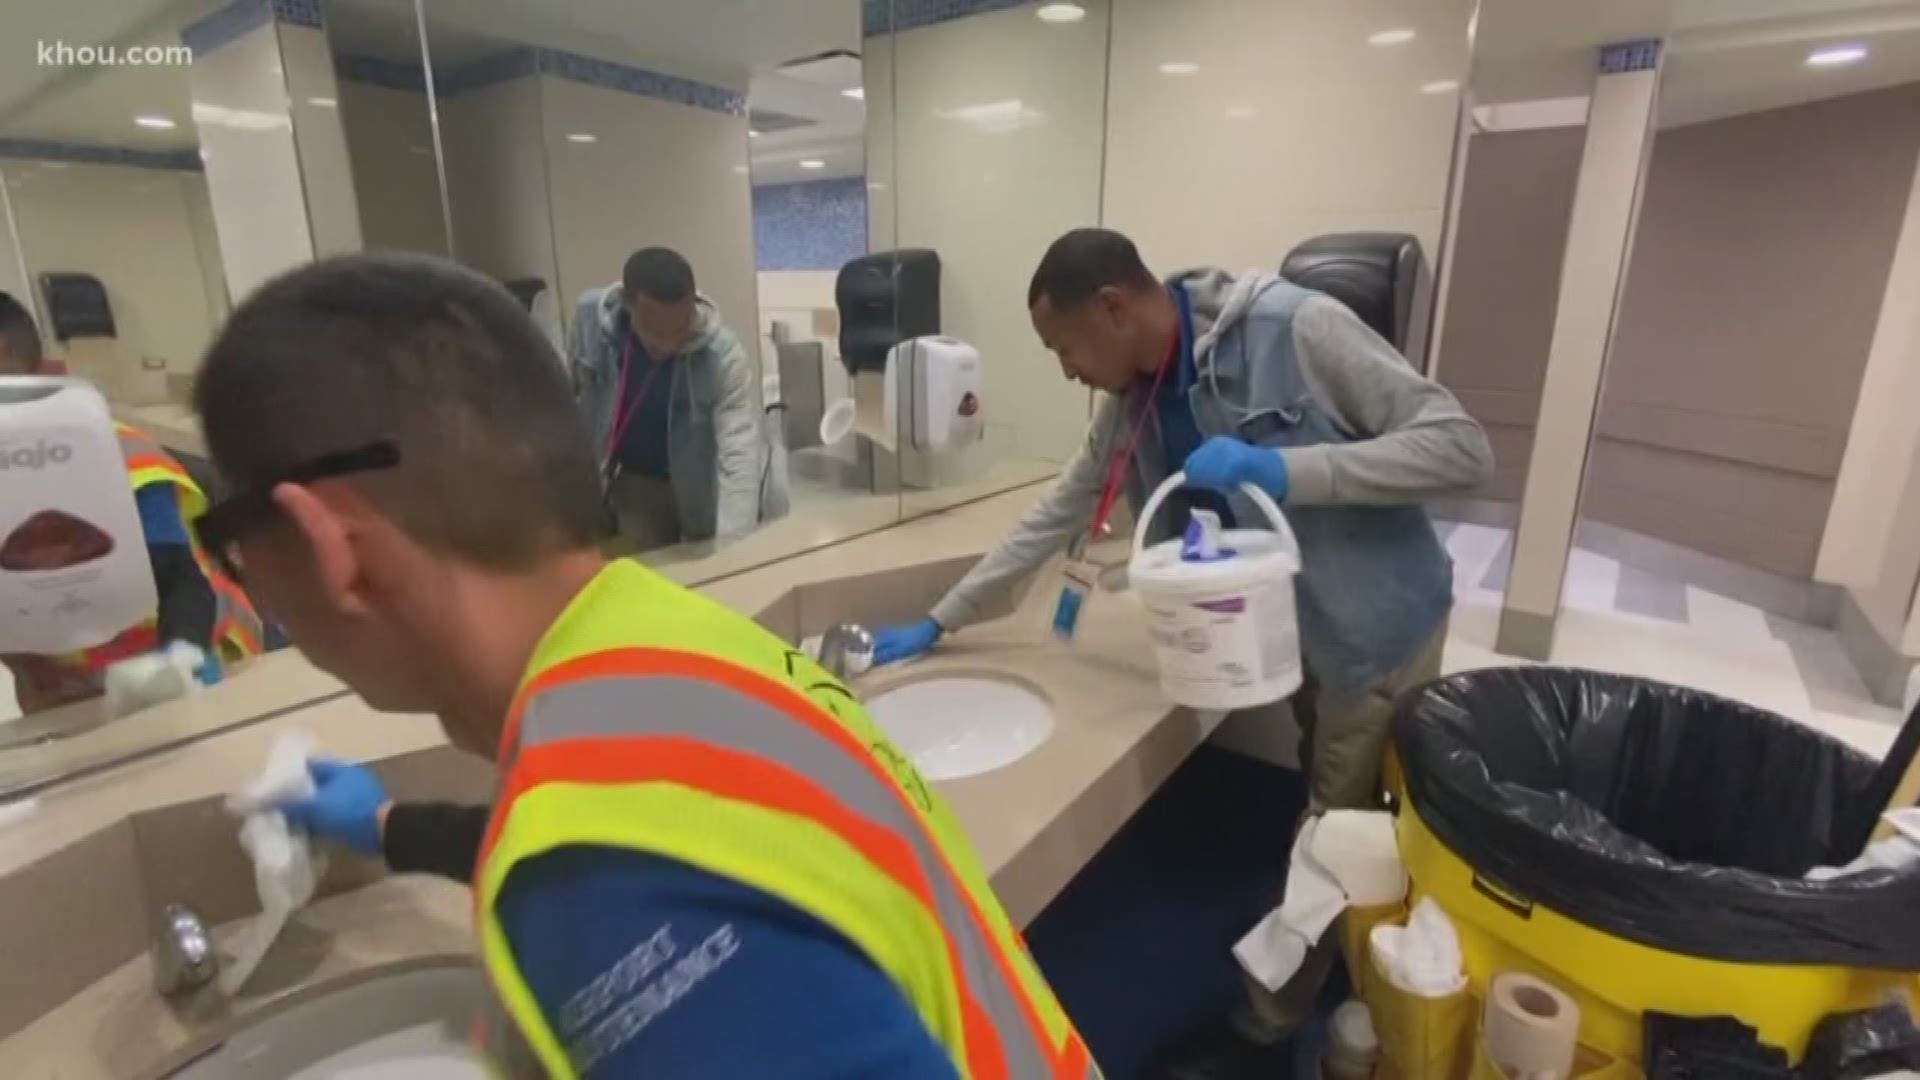 Employees are taking steps to make sure Houston's airports are clean amid coronavirus concerns.